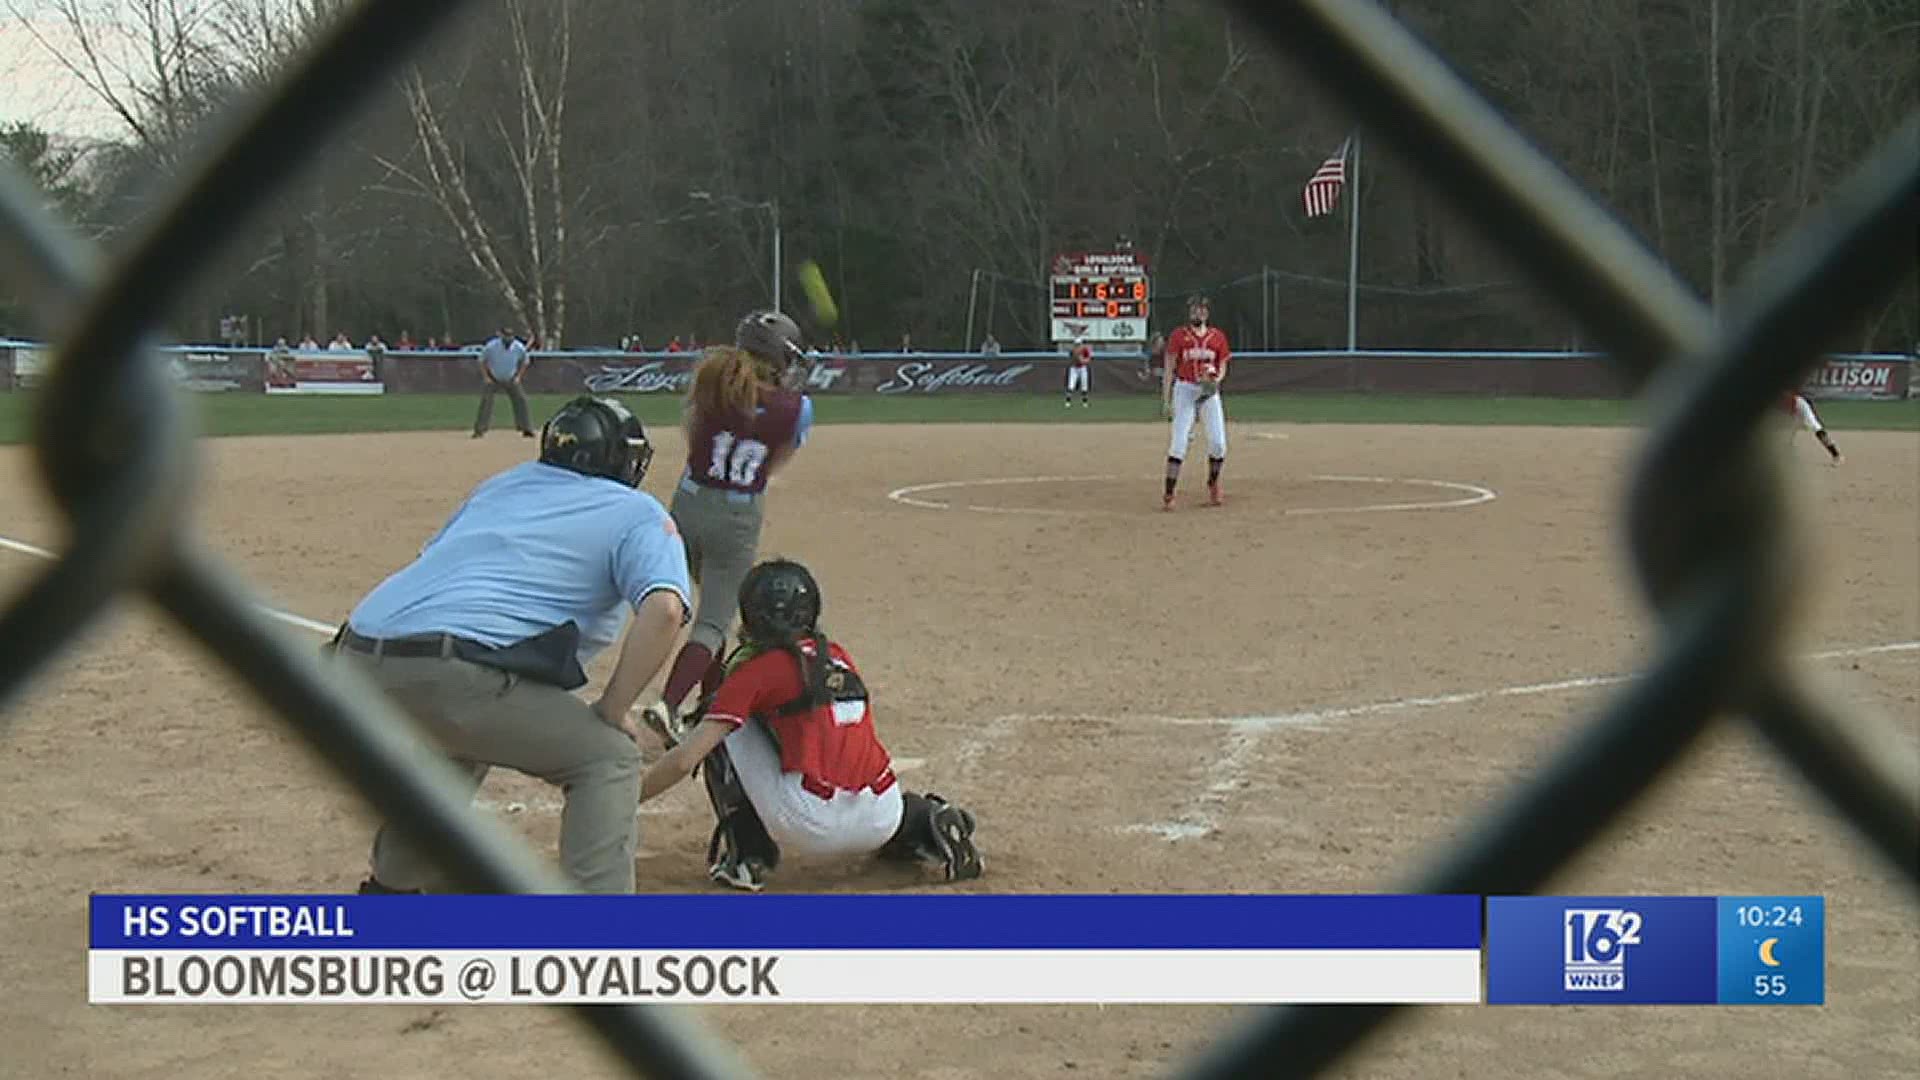 Loyalsock mercy-ruled Bloomsburg 12-1 in six innings in HS softball.